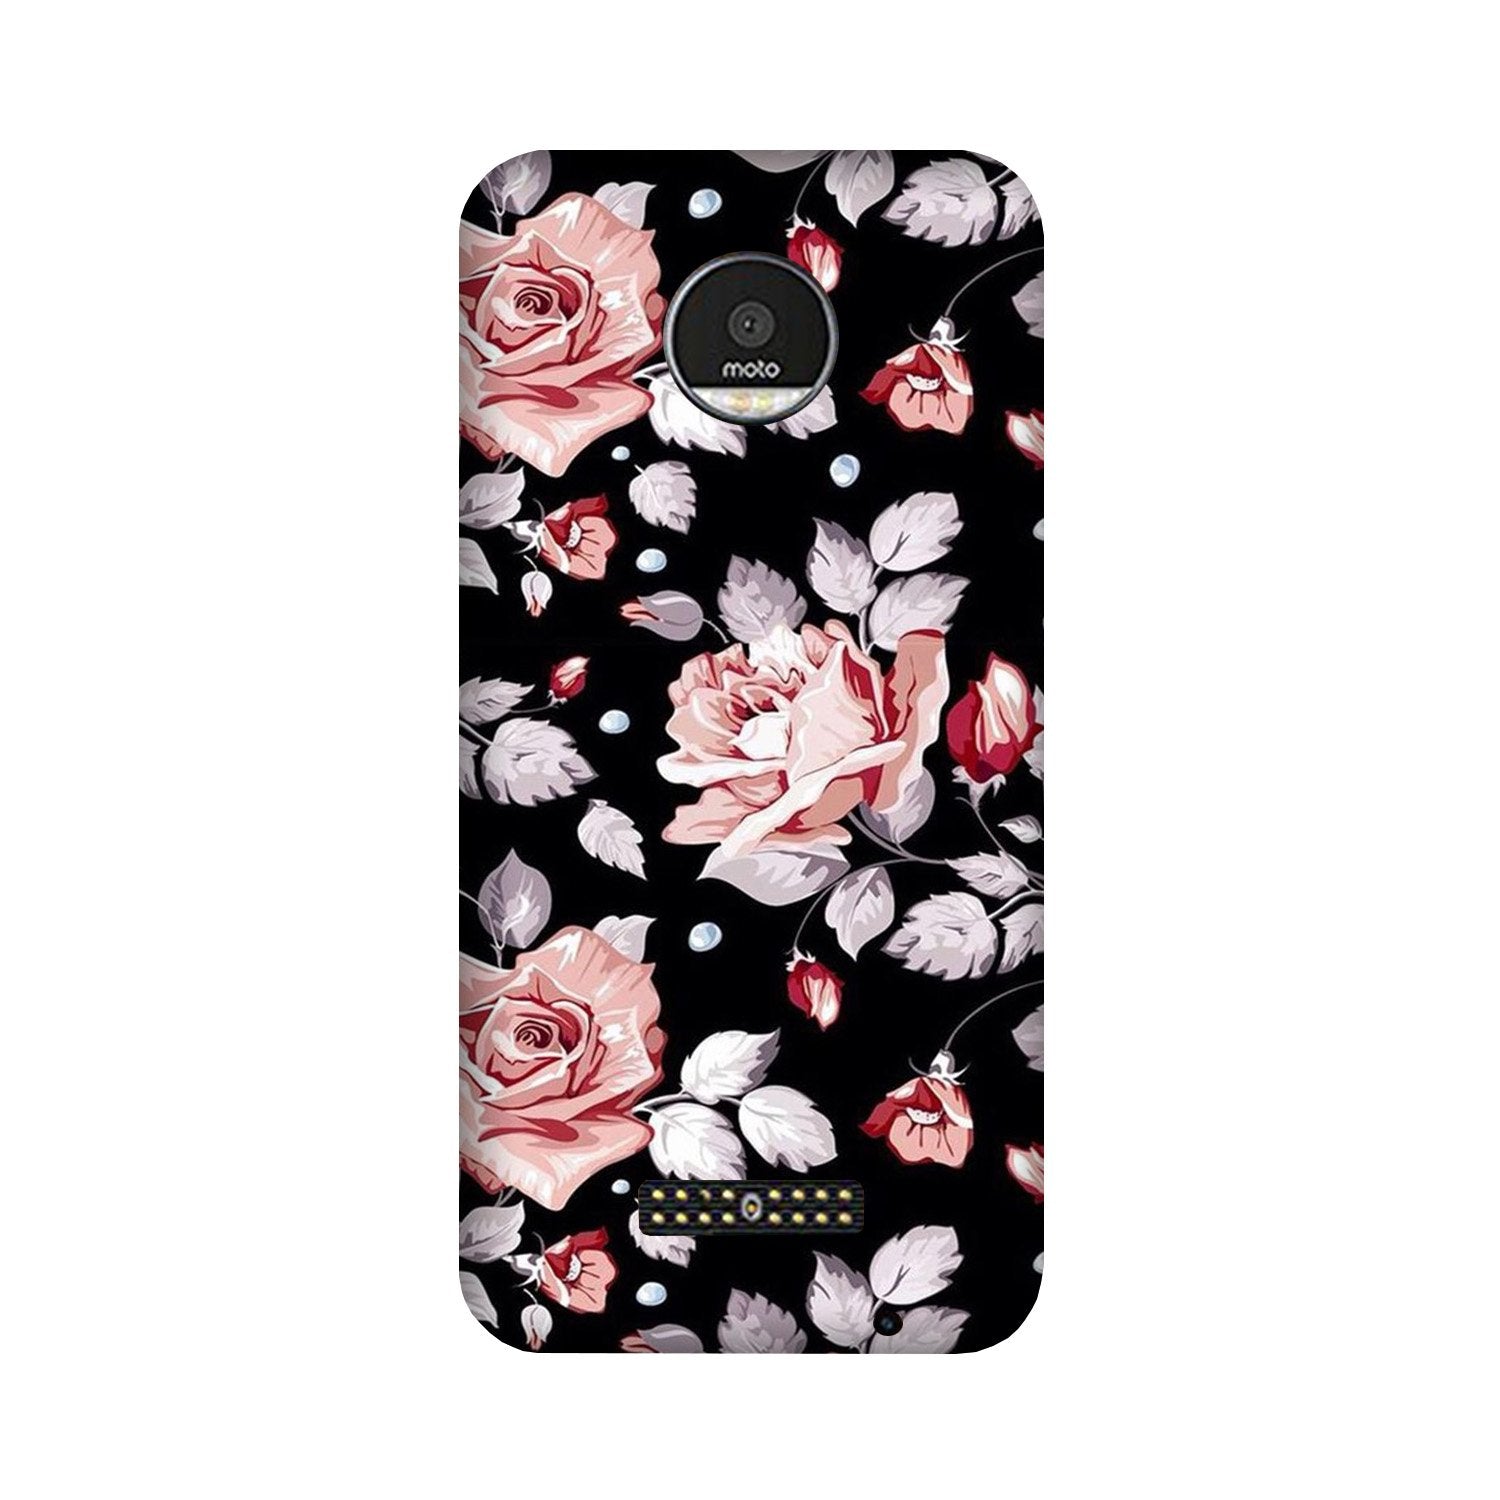 Pink rose Case for Moto Z2 Play